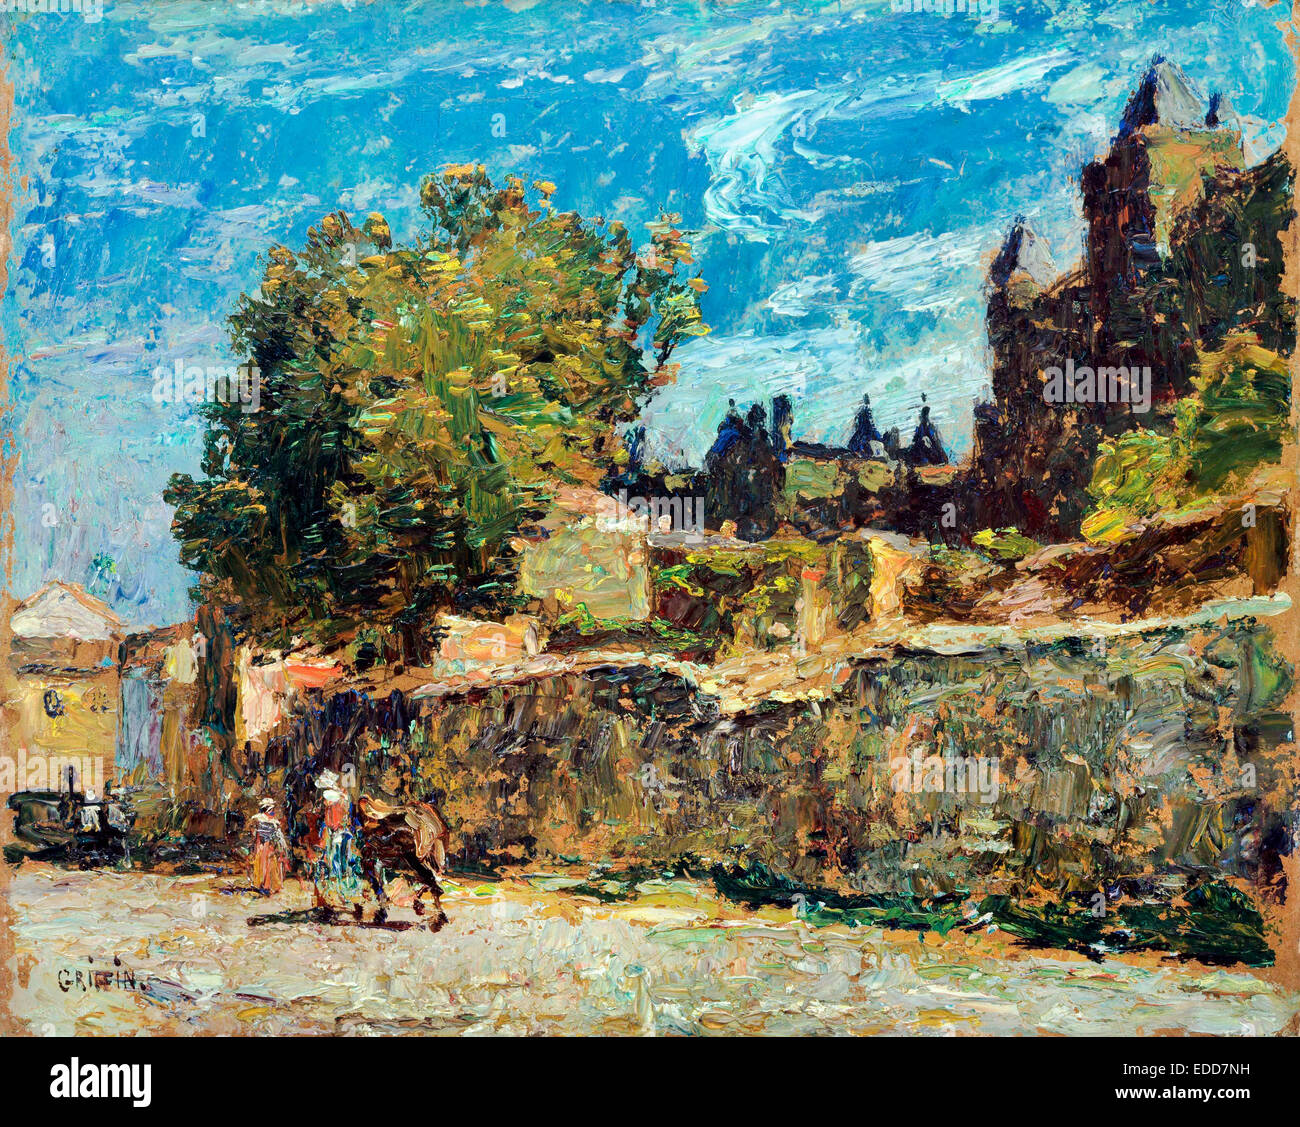 Walter Griffin, Carcassonne 1894 Oil on board. The Phillips Collection, Washington, D.C., USA. Stock Photo